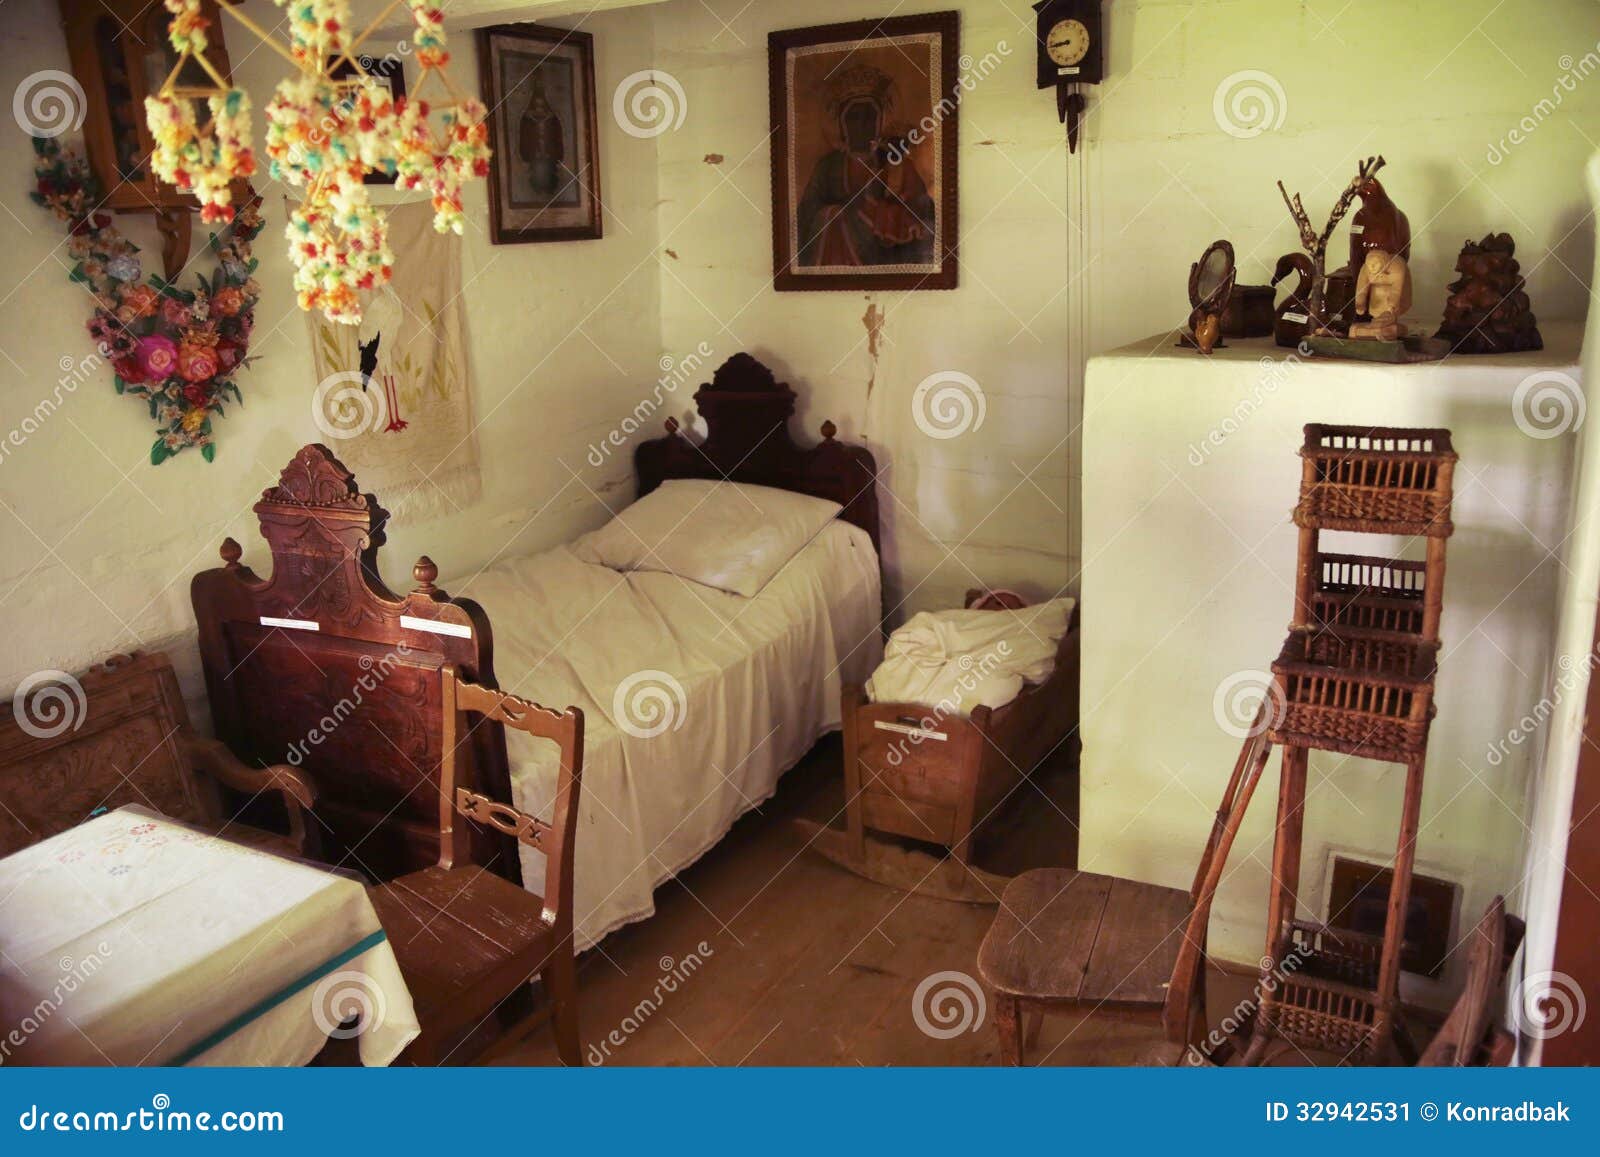 An Old Wooden And Rustic Bedroom  Stock Image Image 32942531